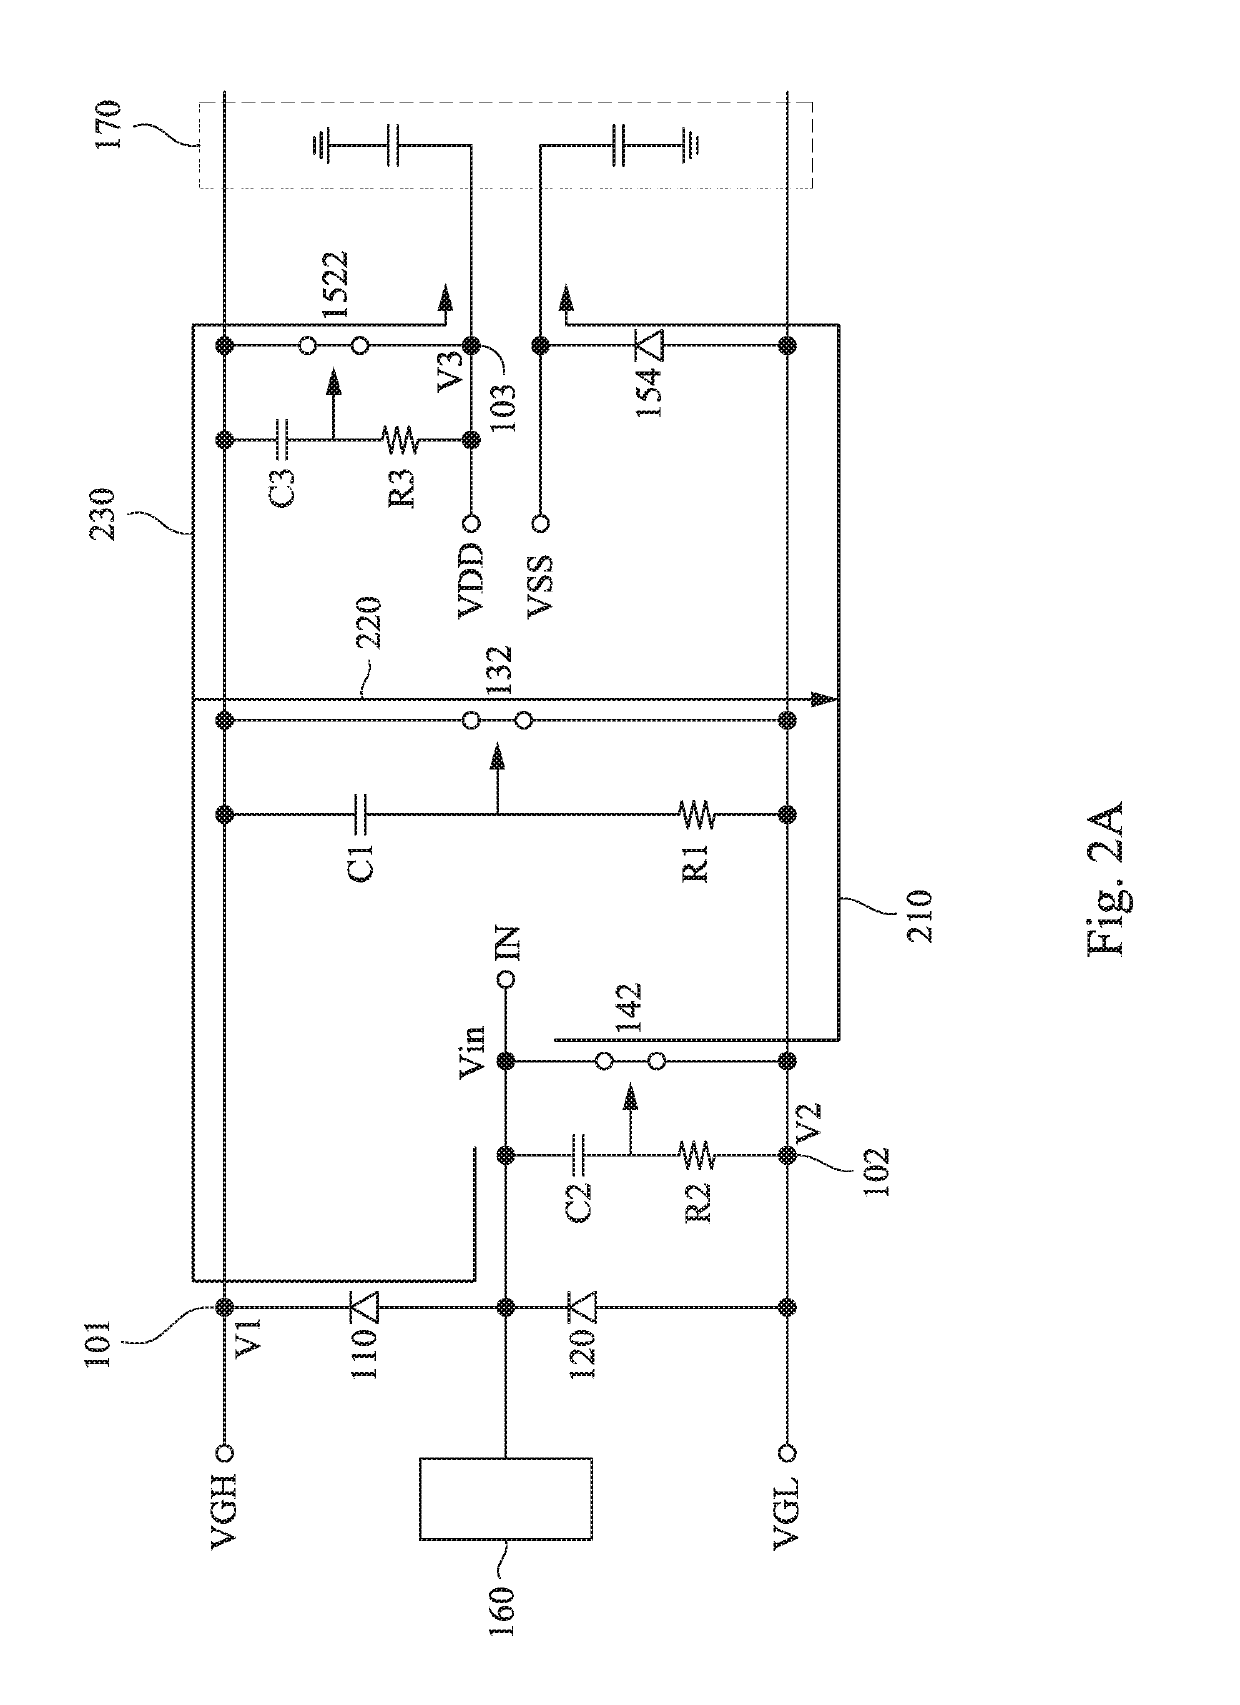 ESD protection circuit, related display panel with protection against ESD, and ESD protection structure